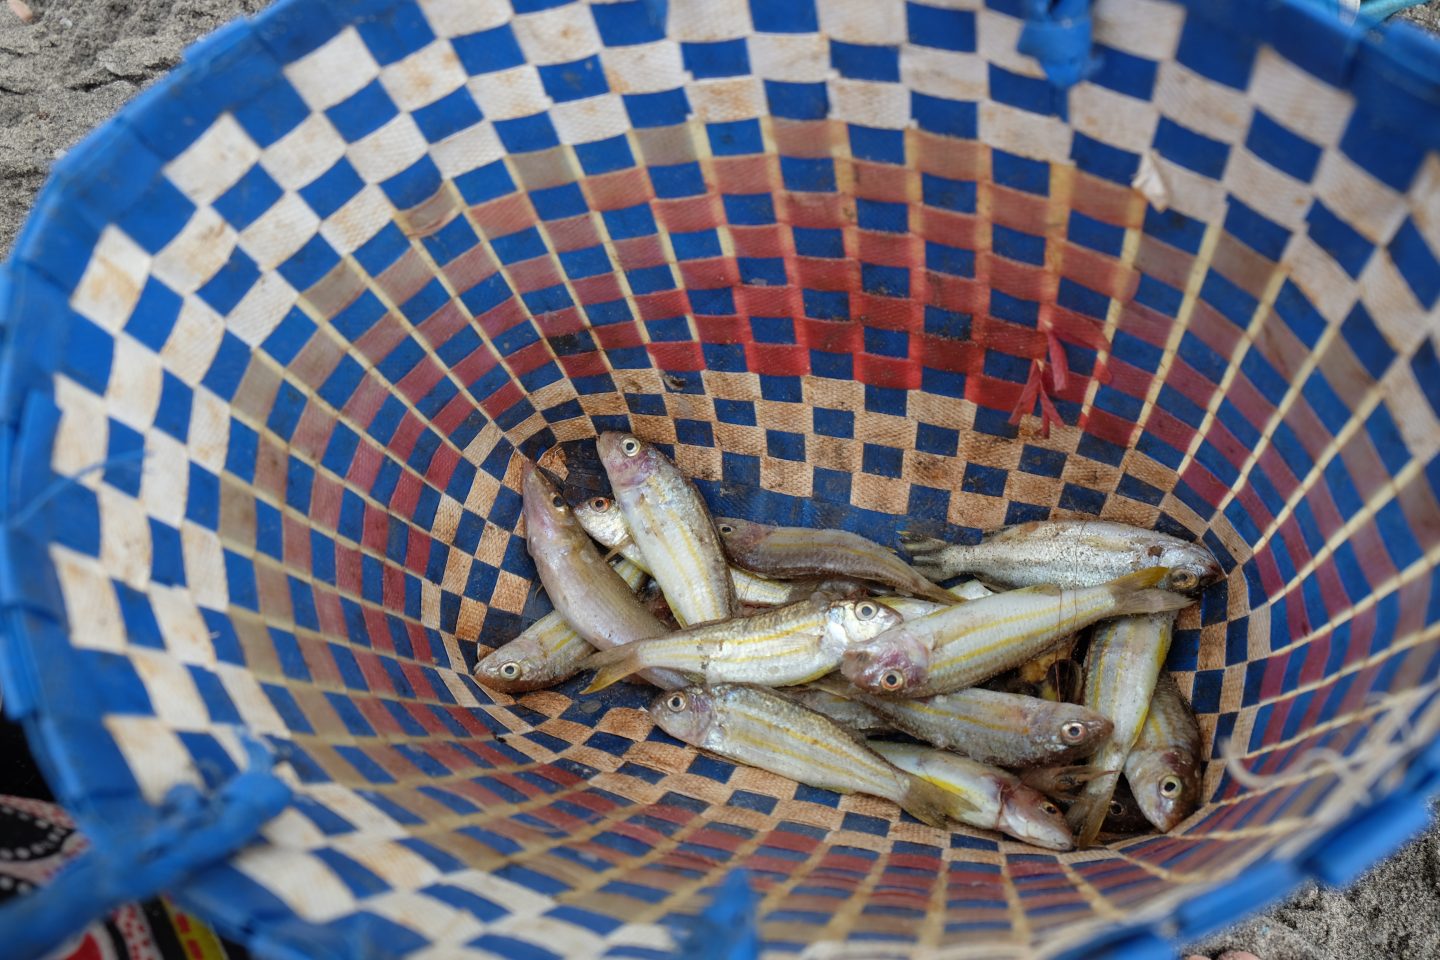 A smal catch of fish in a basket. In recent years, catches off the coast of Madagascar have been shrinking